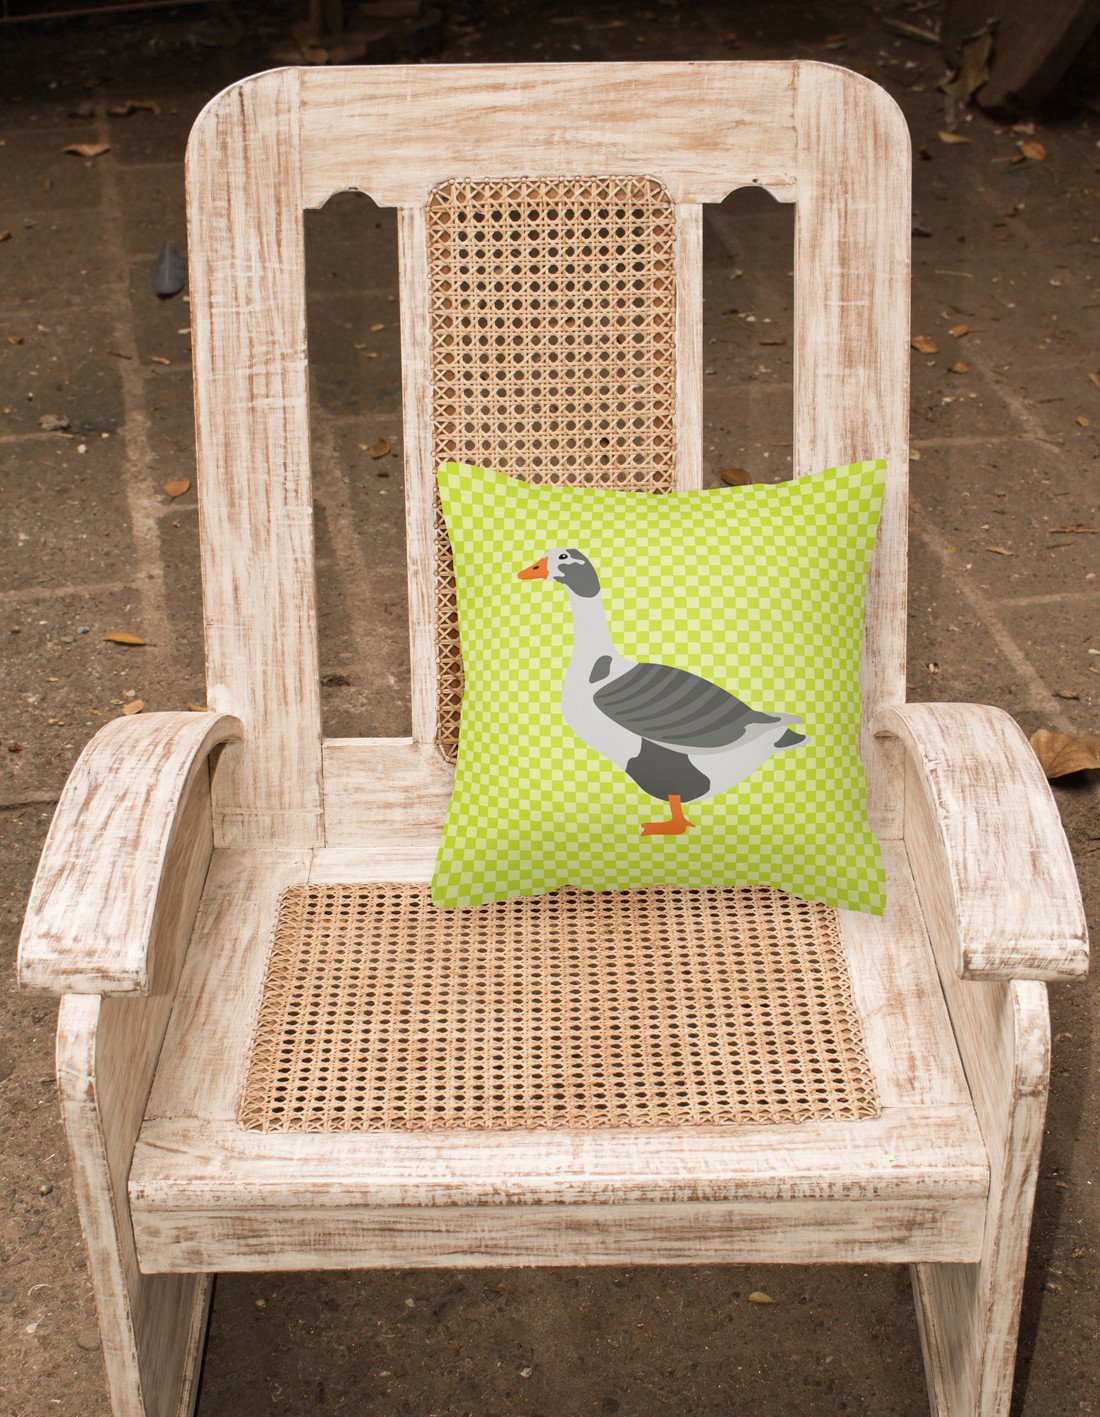 West of England Goose Green Fabric Decorative Pillow BB7721PW1818 by Caroline's Treasures